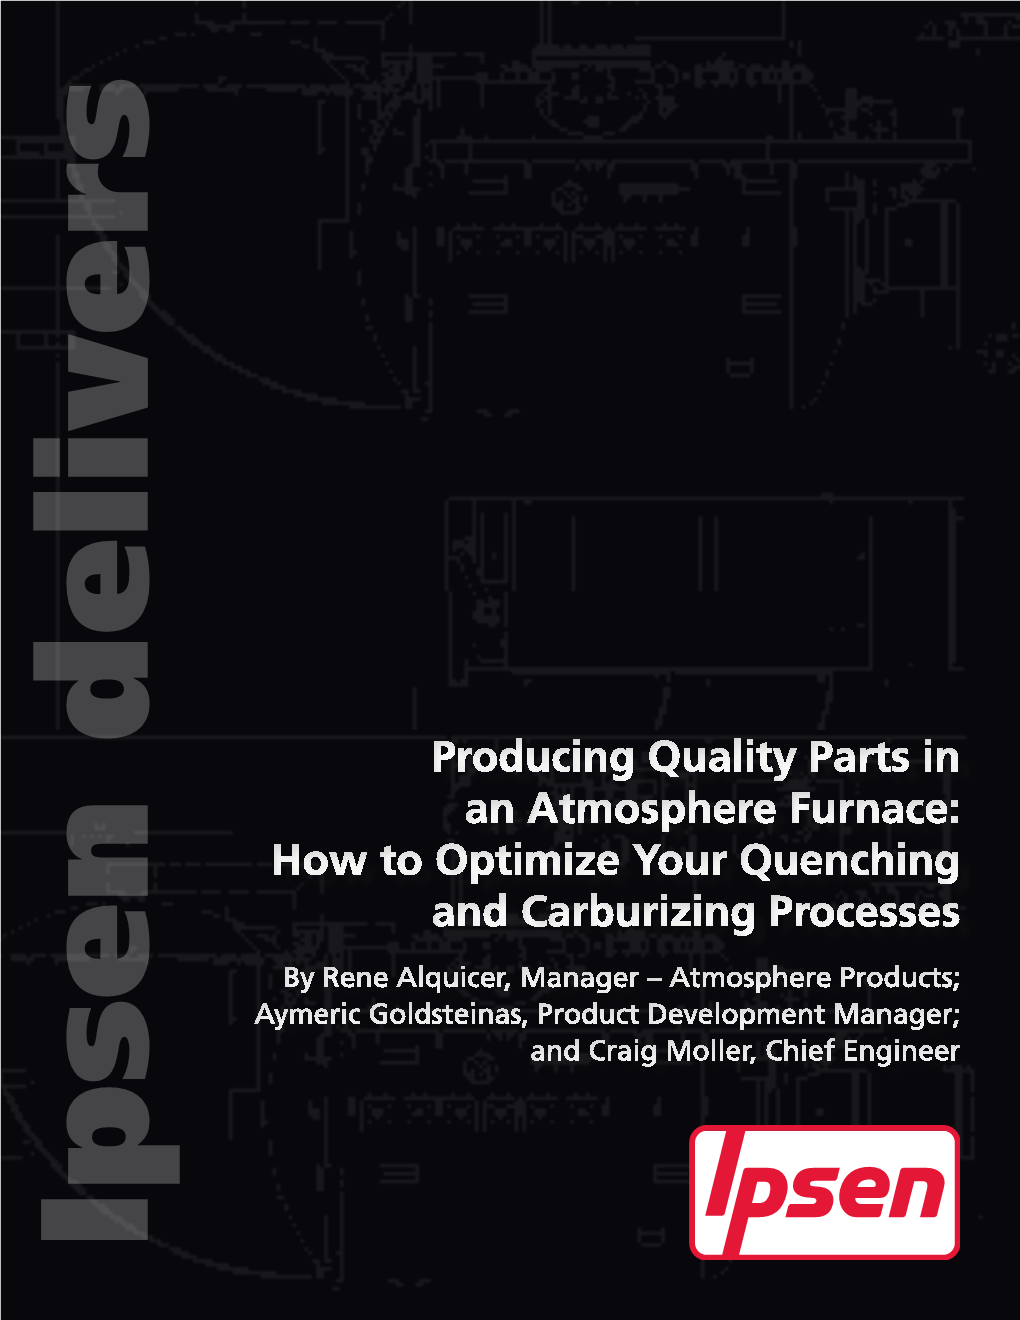 How to Optimize Your Quenching and Carburizing Processes